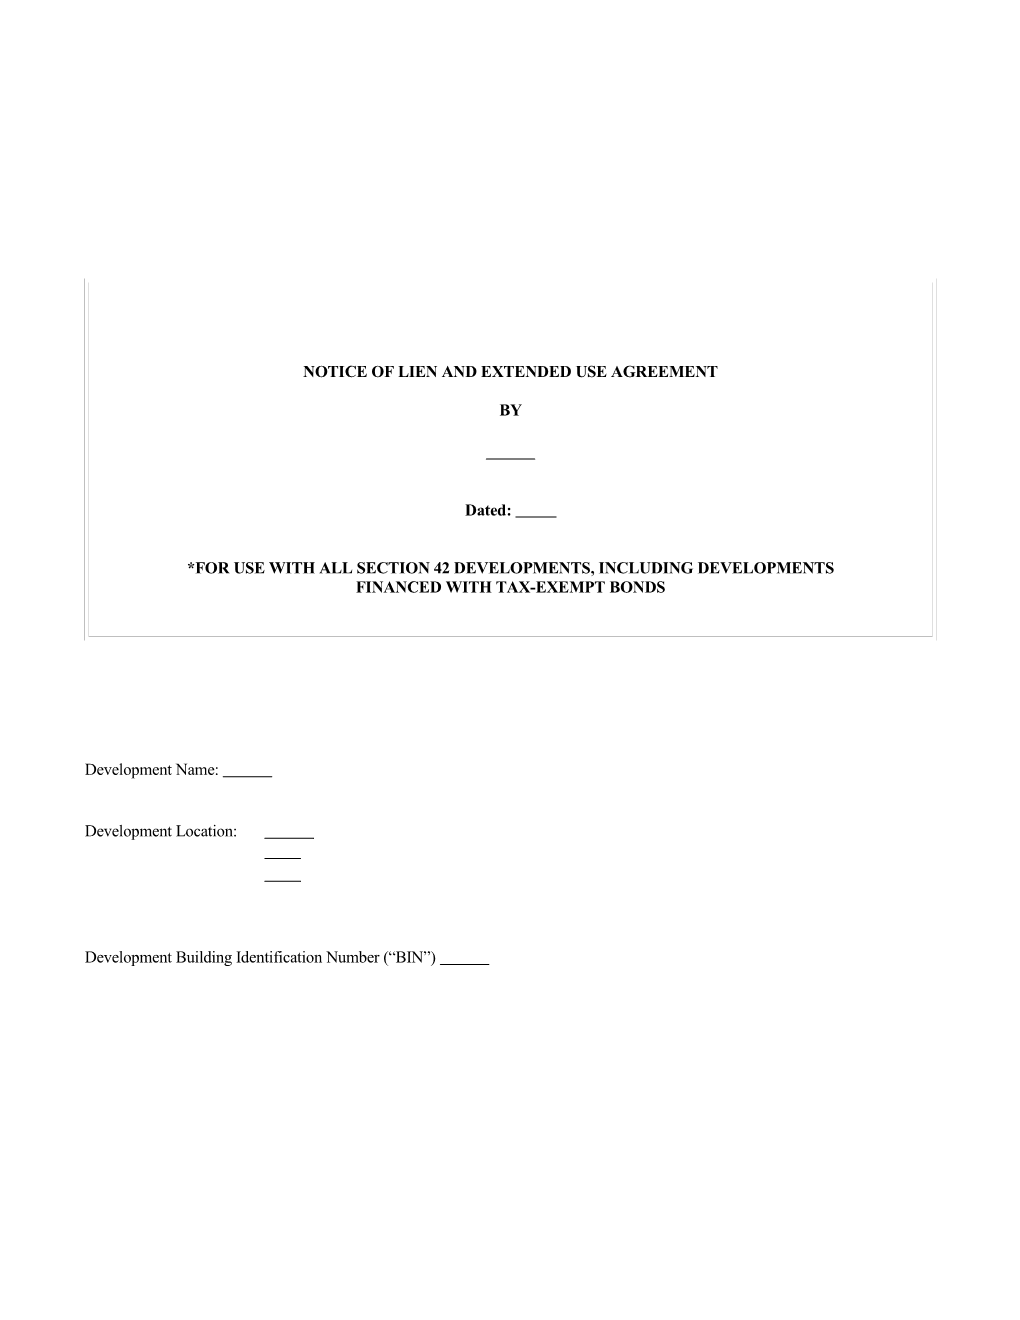 Grant, Lien, and Restrictive Covenant Agreement s1